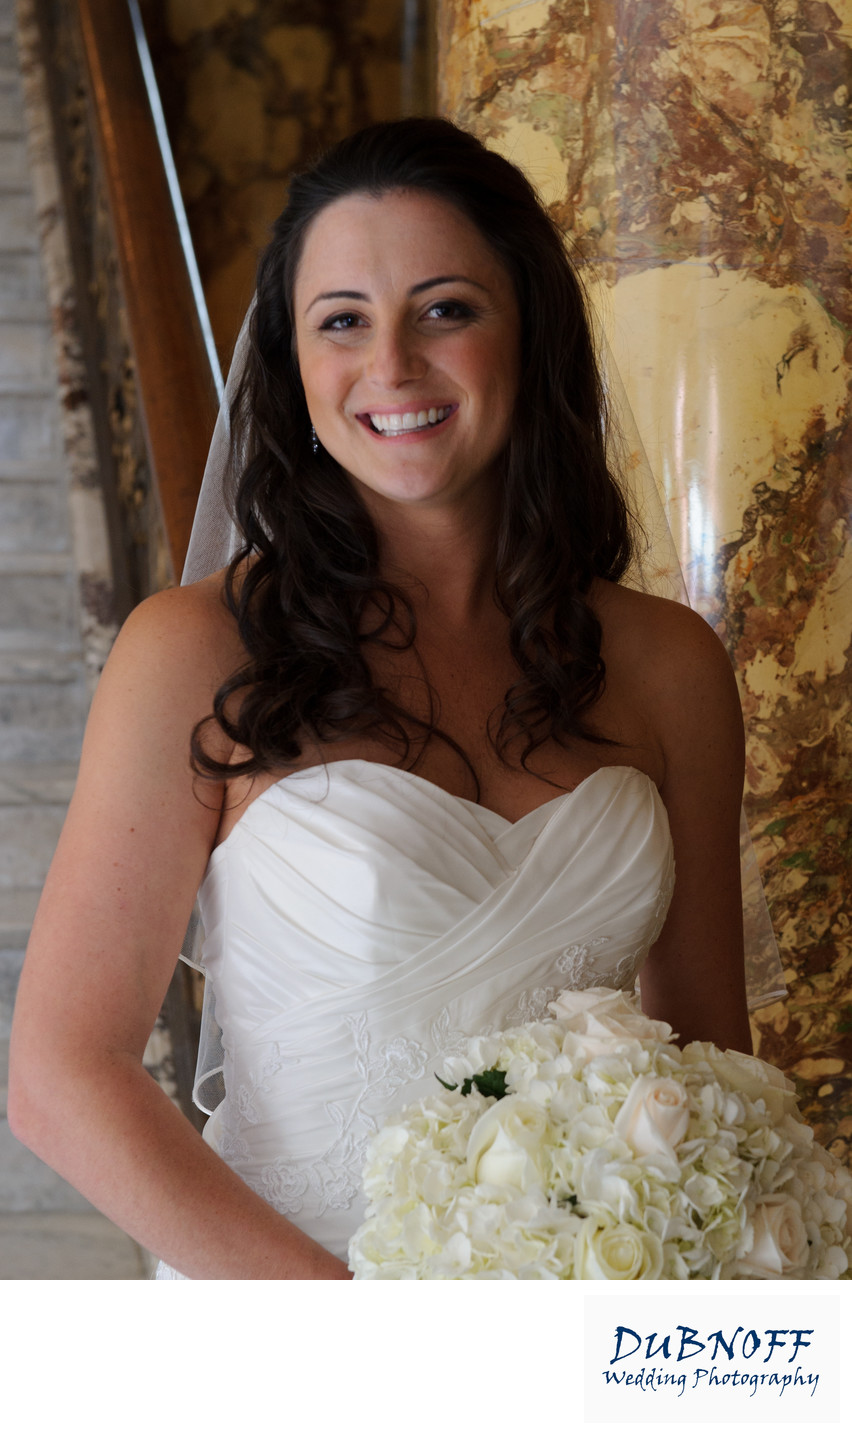 A Happy Bride at the Fairmont Hotel in San Francisco